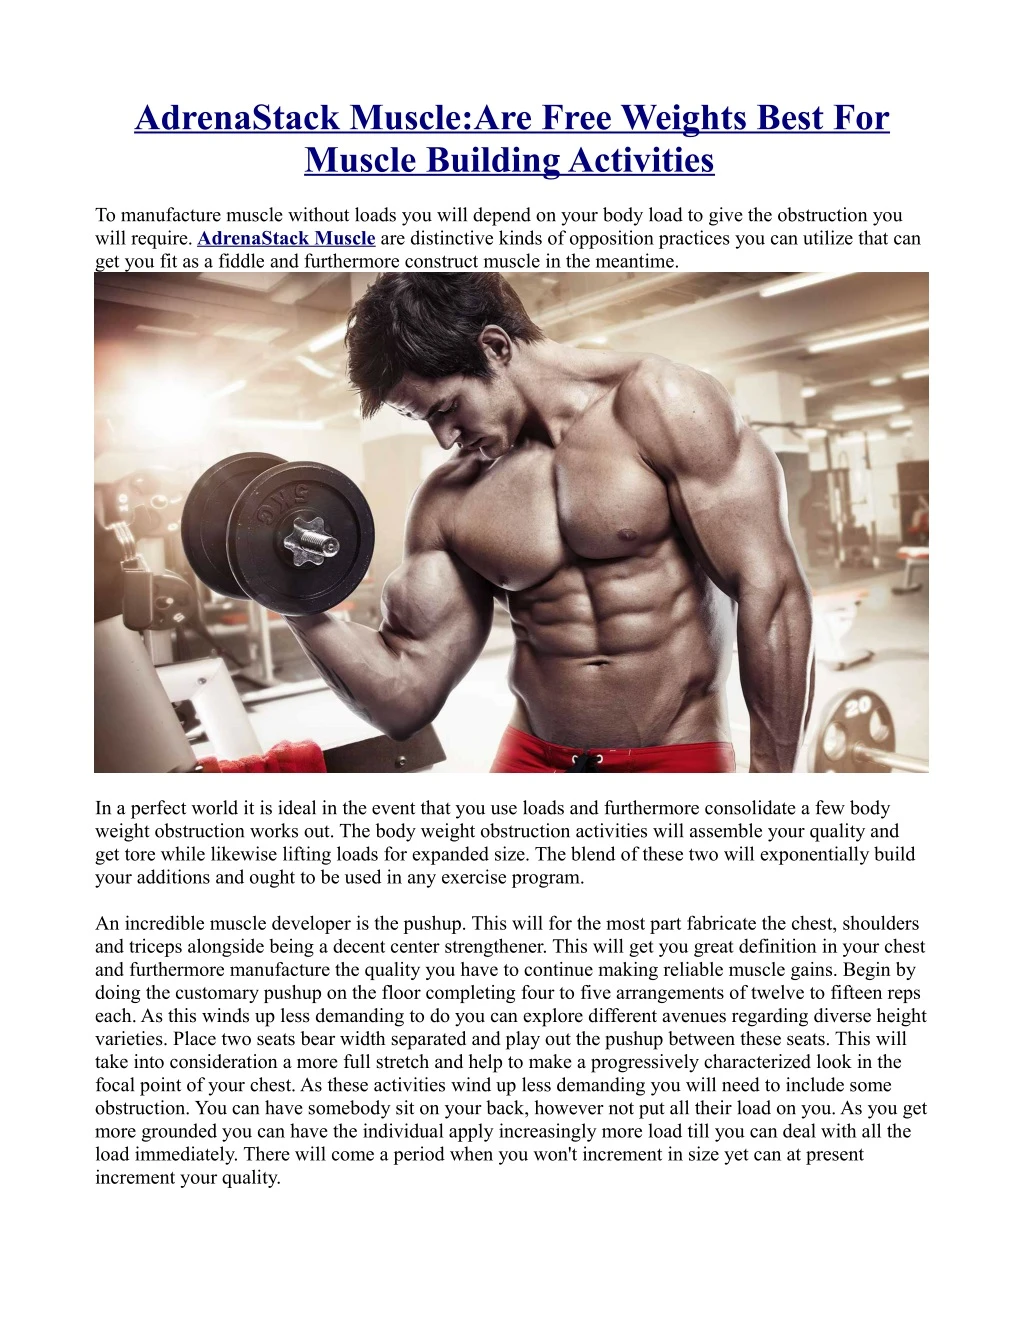 adrenastack muscle are free weights best